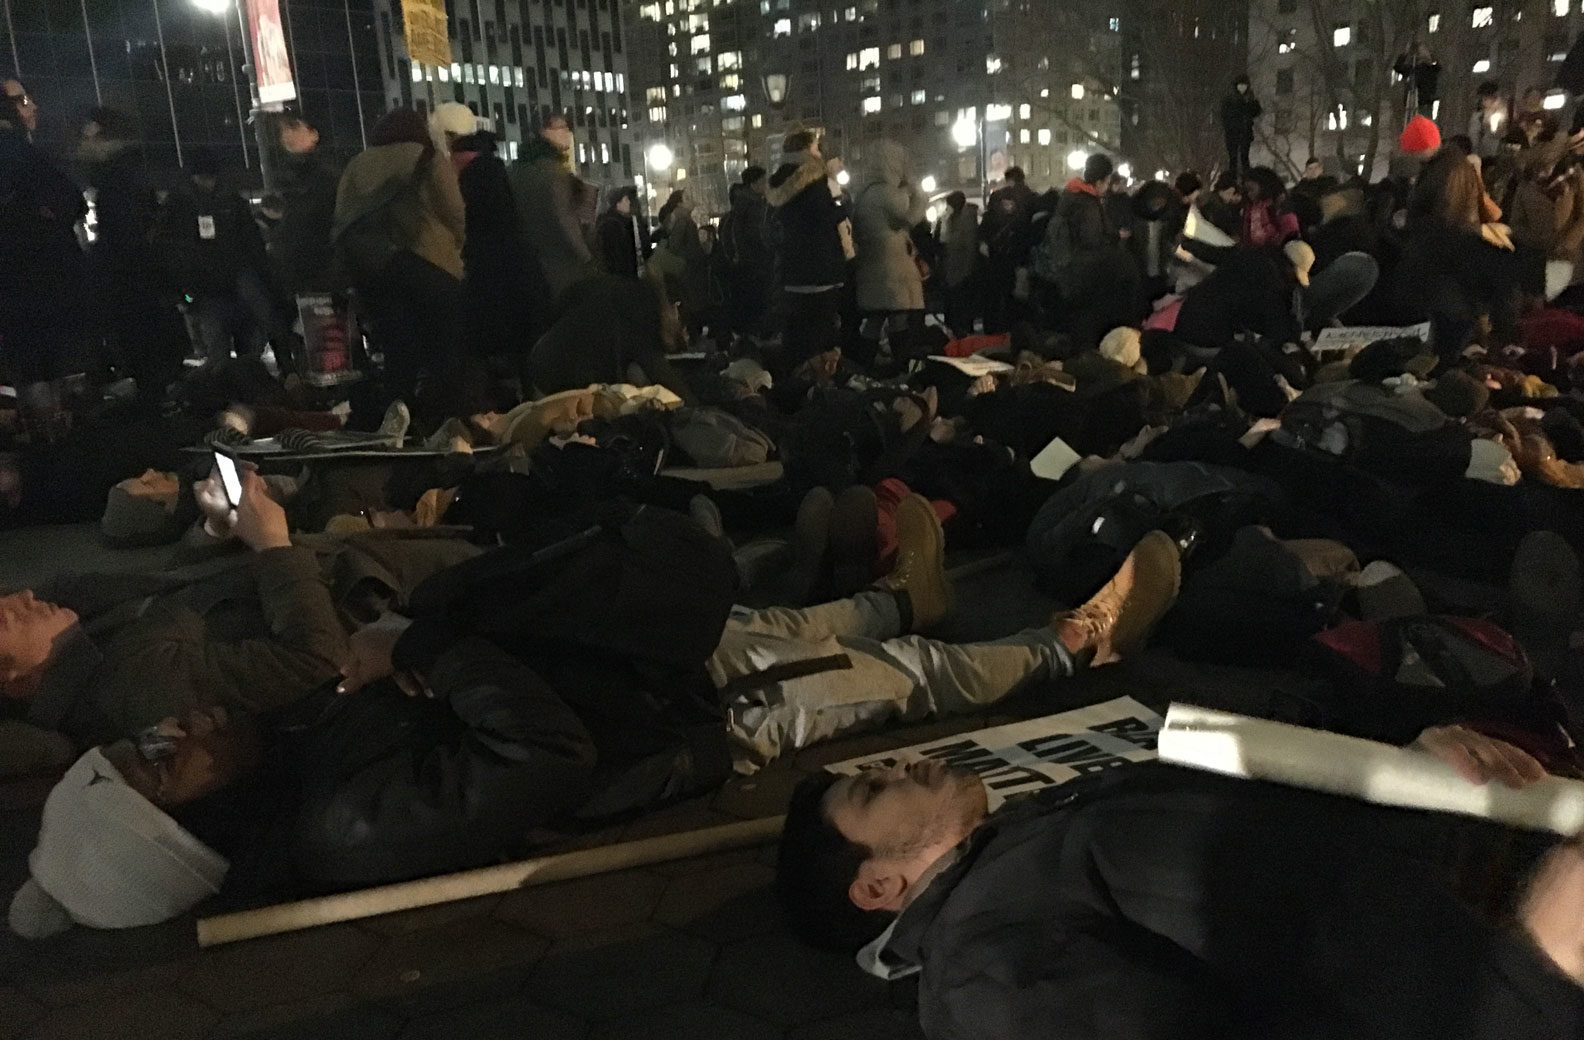 Protesters participating in a "die-in" during the action on Thursday night, Foley Square, Manhattan, February 2, 2017